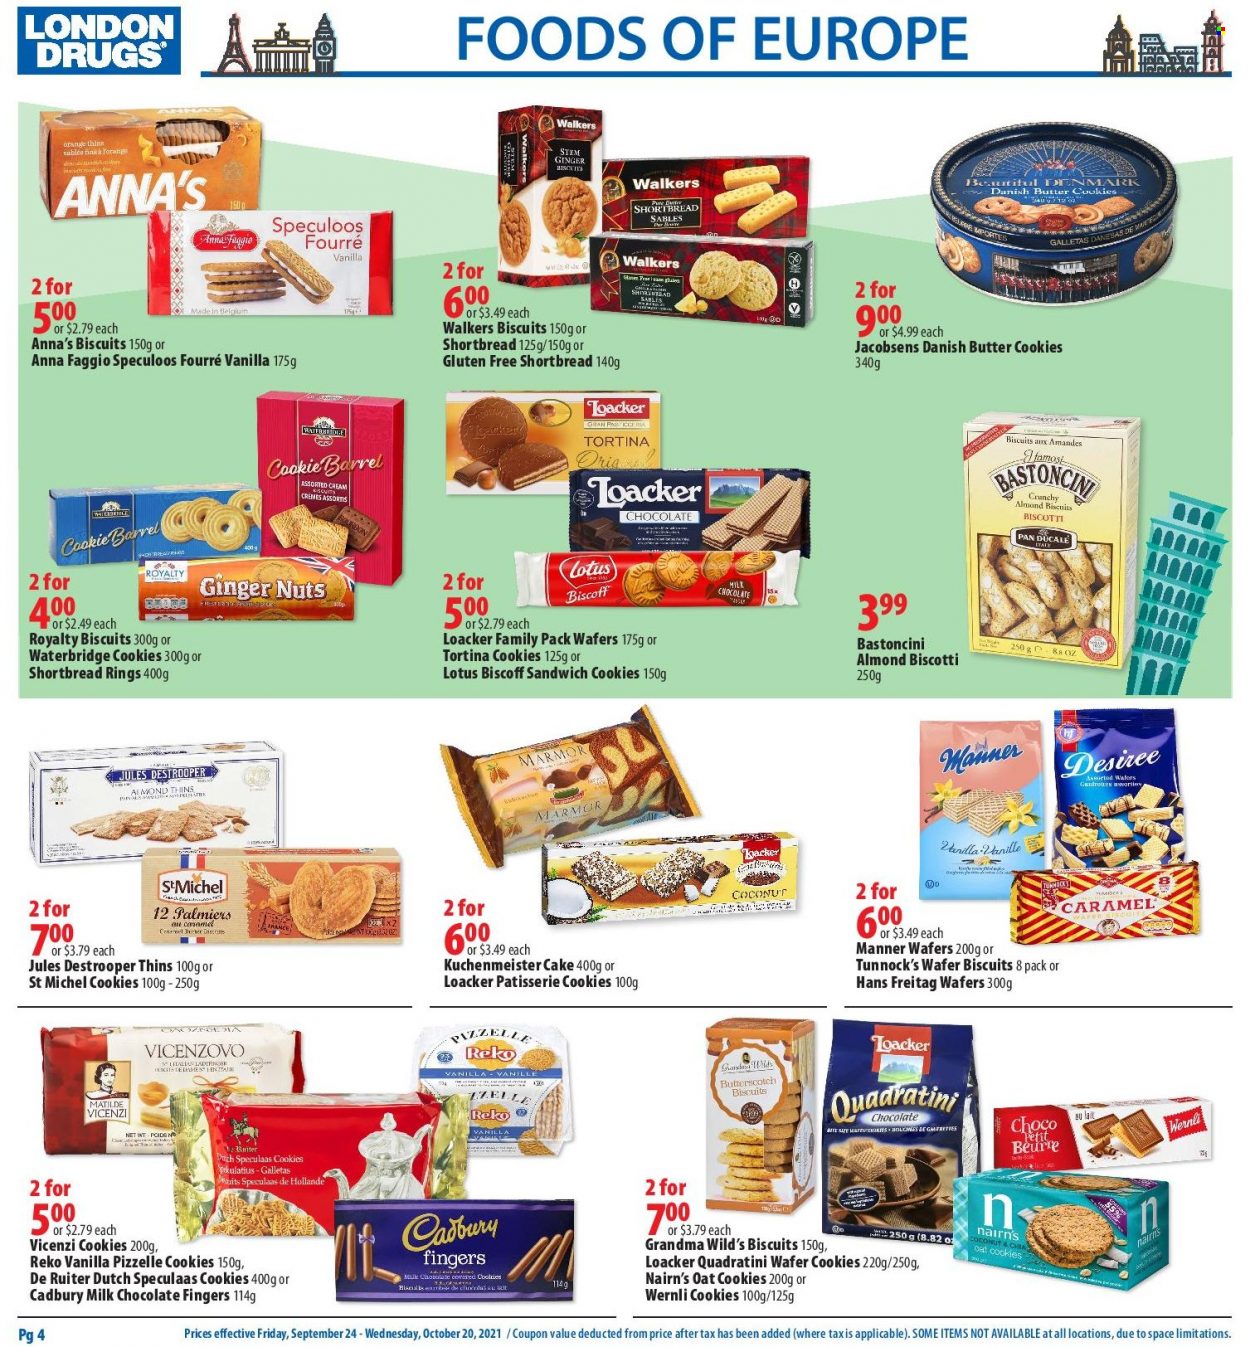 thumbnail - London Drugs Flyer - September 24, 2021 - October 20, 2021 - Sales products - biscotti, butterscotch, cookies, milk chocolate, sandwich cookies, Spekulatius, wafers, chocolate, cake, butter cookies, biscuit, Cadbury, Thins, ginger, caramel, Lotus, pan. Page 4.